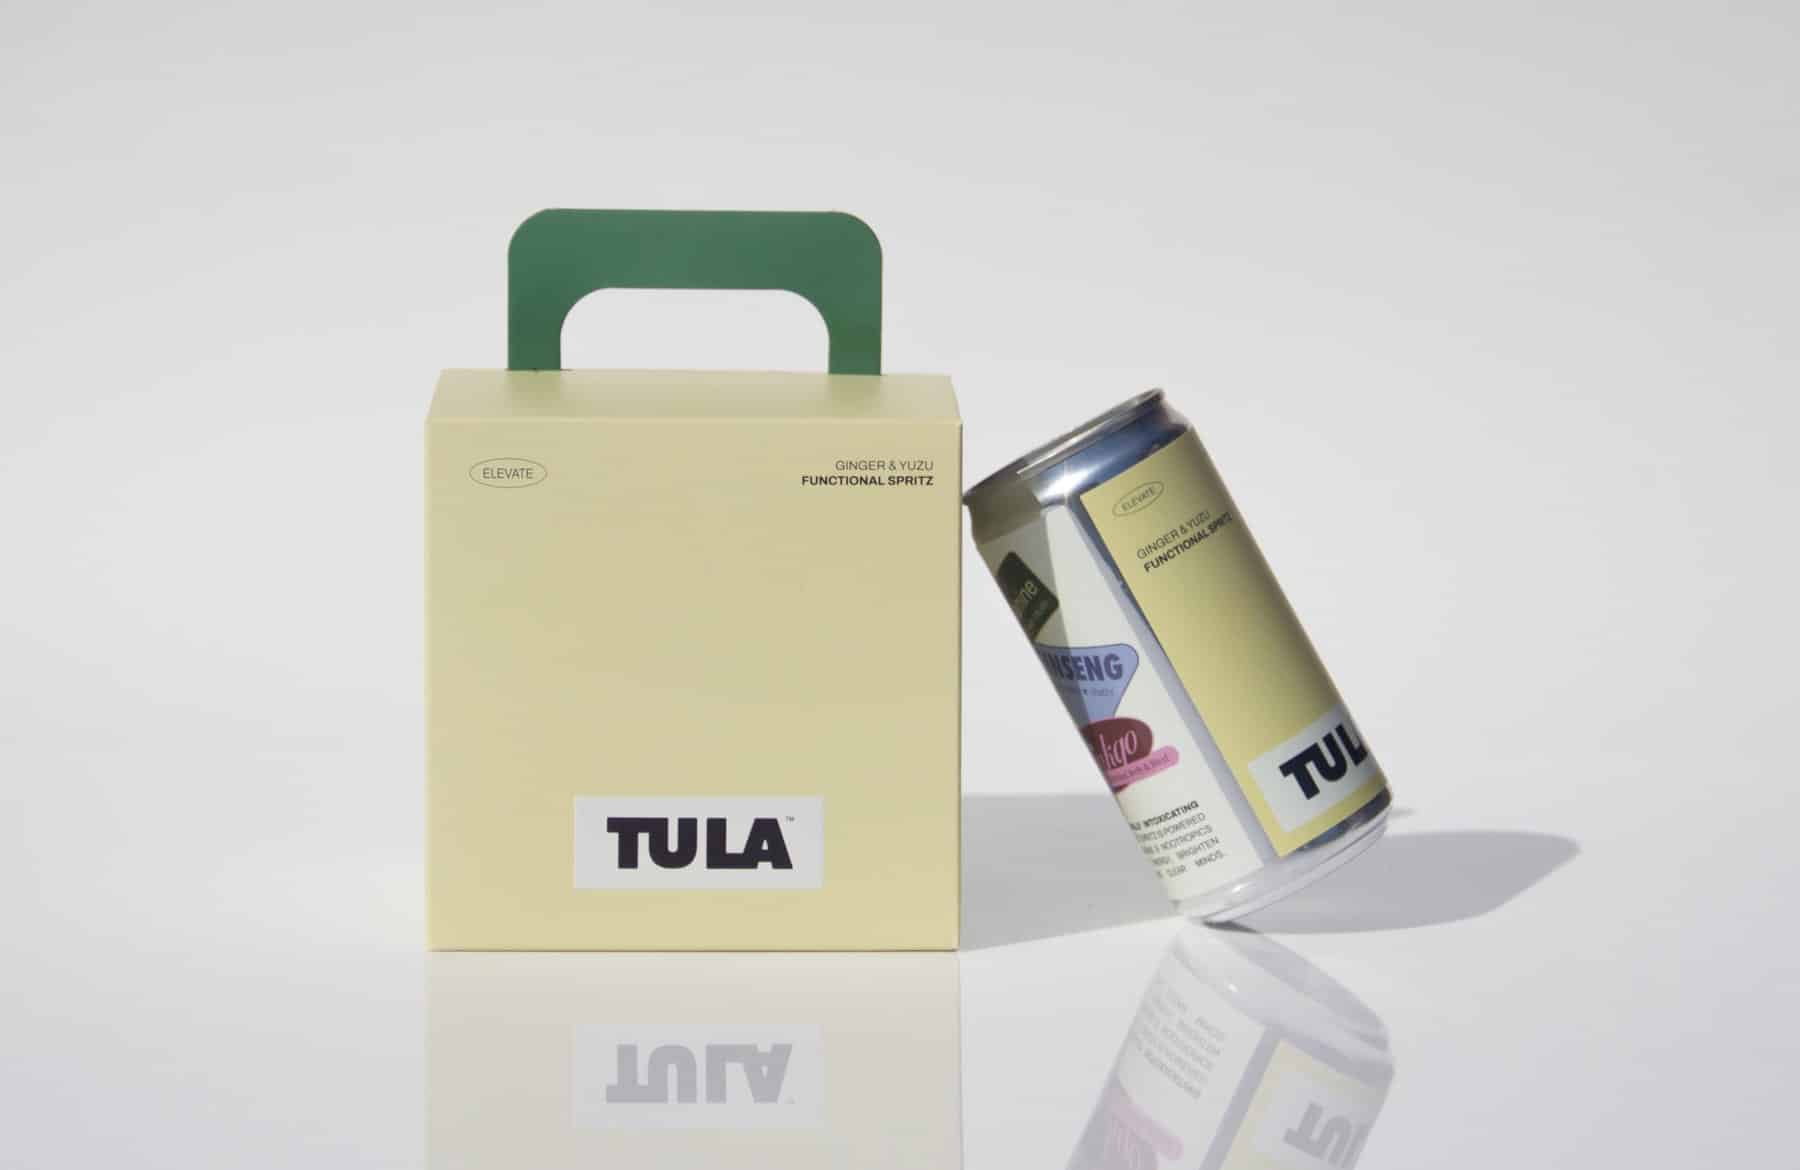 founder-series-tula-01